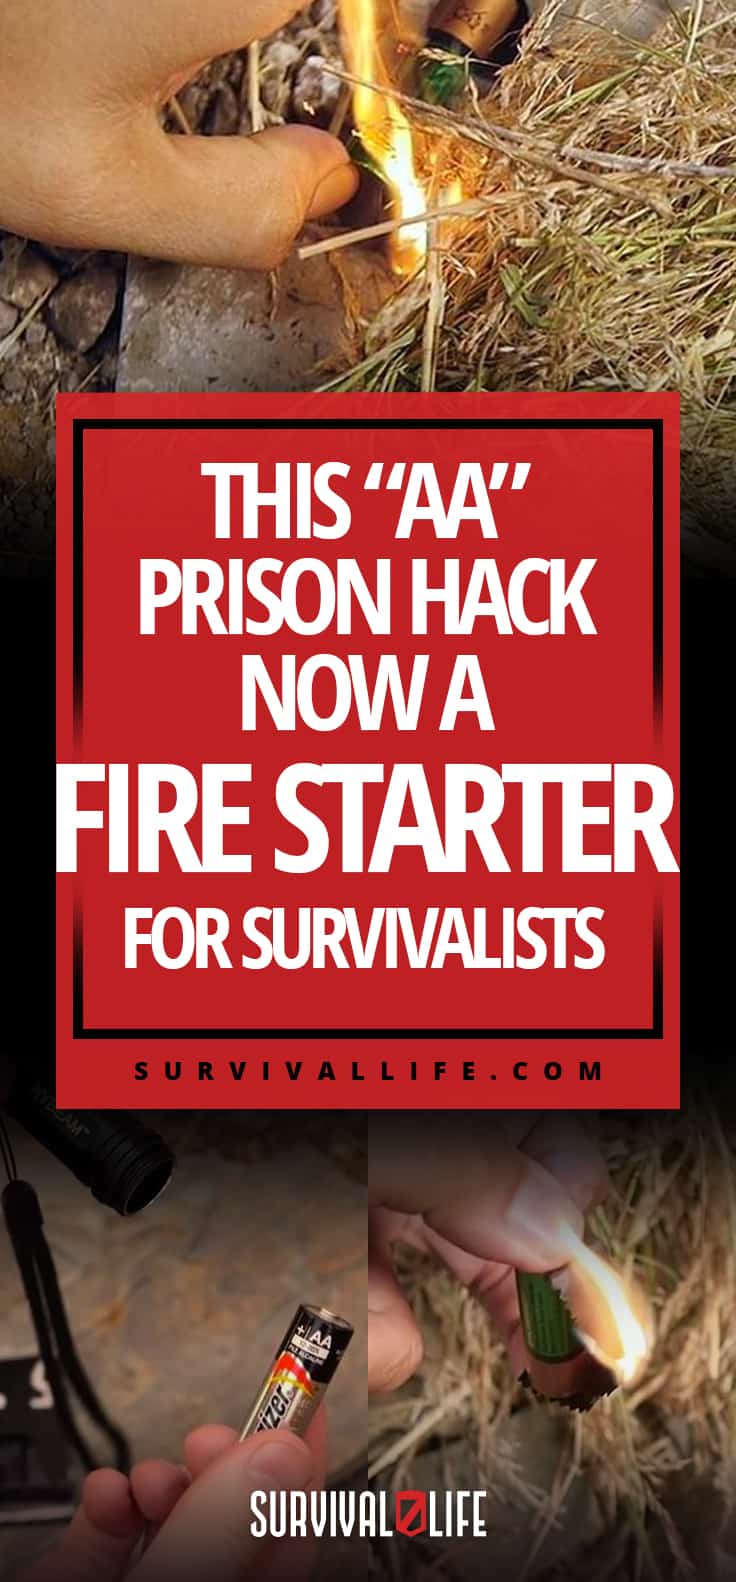 This "AA" Prison Hack Now A Fire Starter For Survivalists